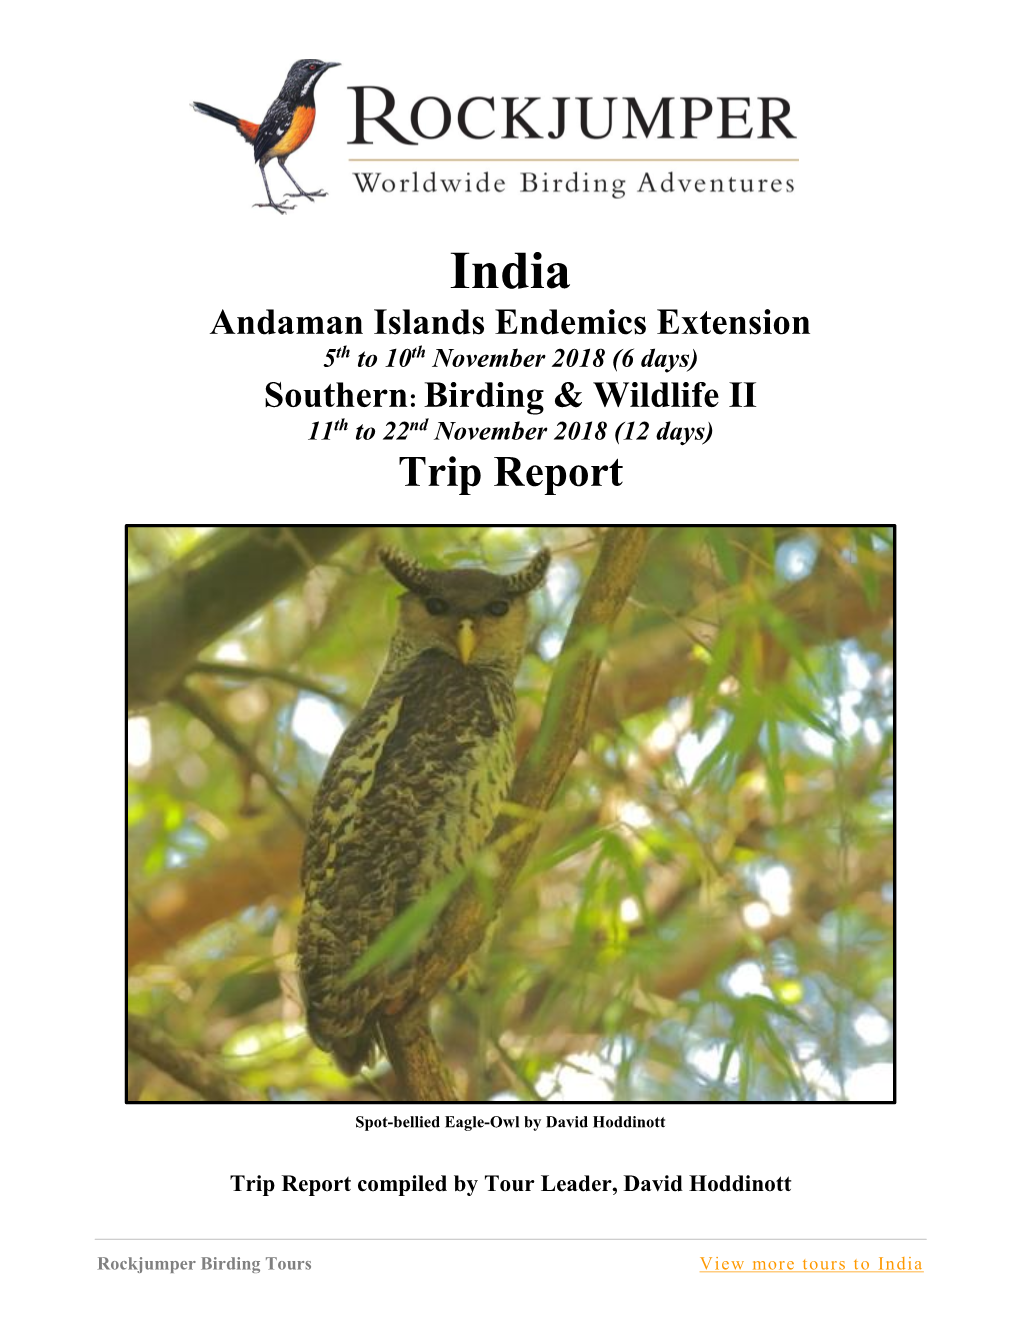 India Andaman Islands Endemics Extension 5Th to 10Th November 2018 (6 Days) Southern: Birding & Wildlife II 11Th to 22Nd November 2018 (12 Days) Trip Report